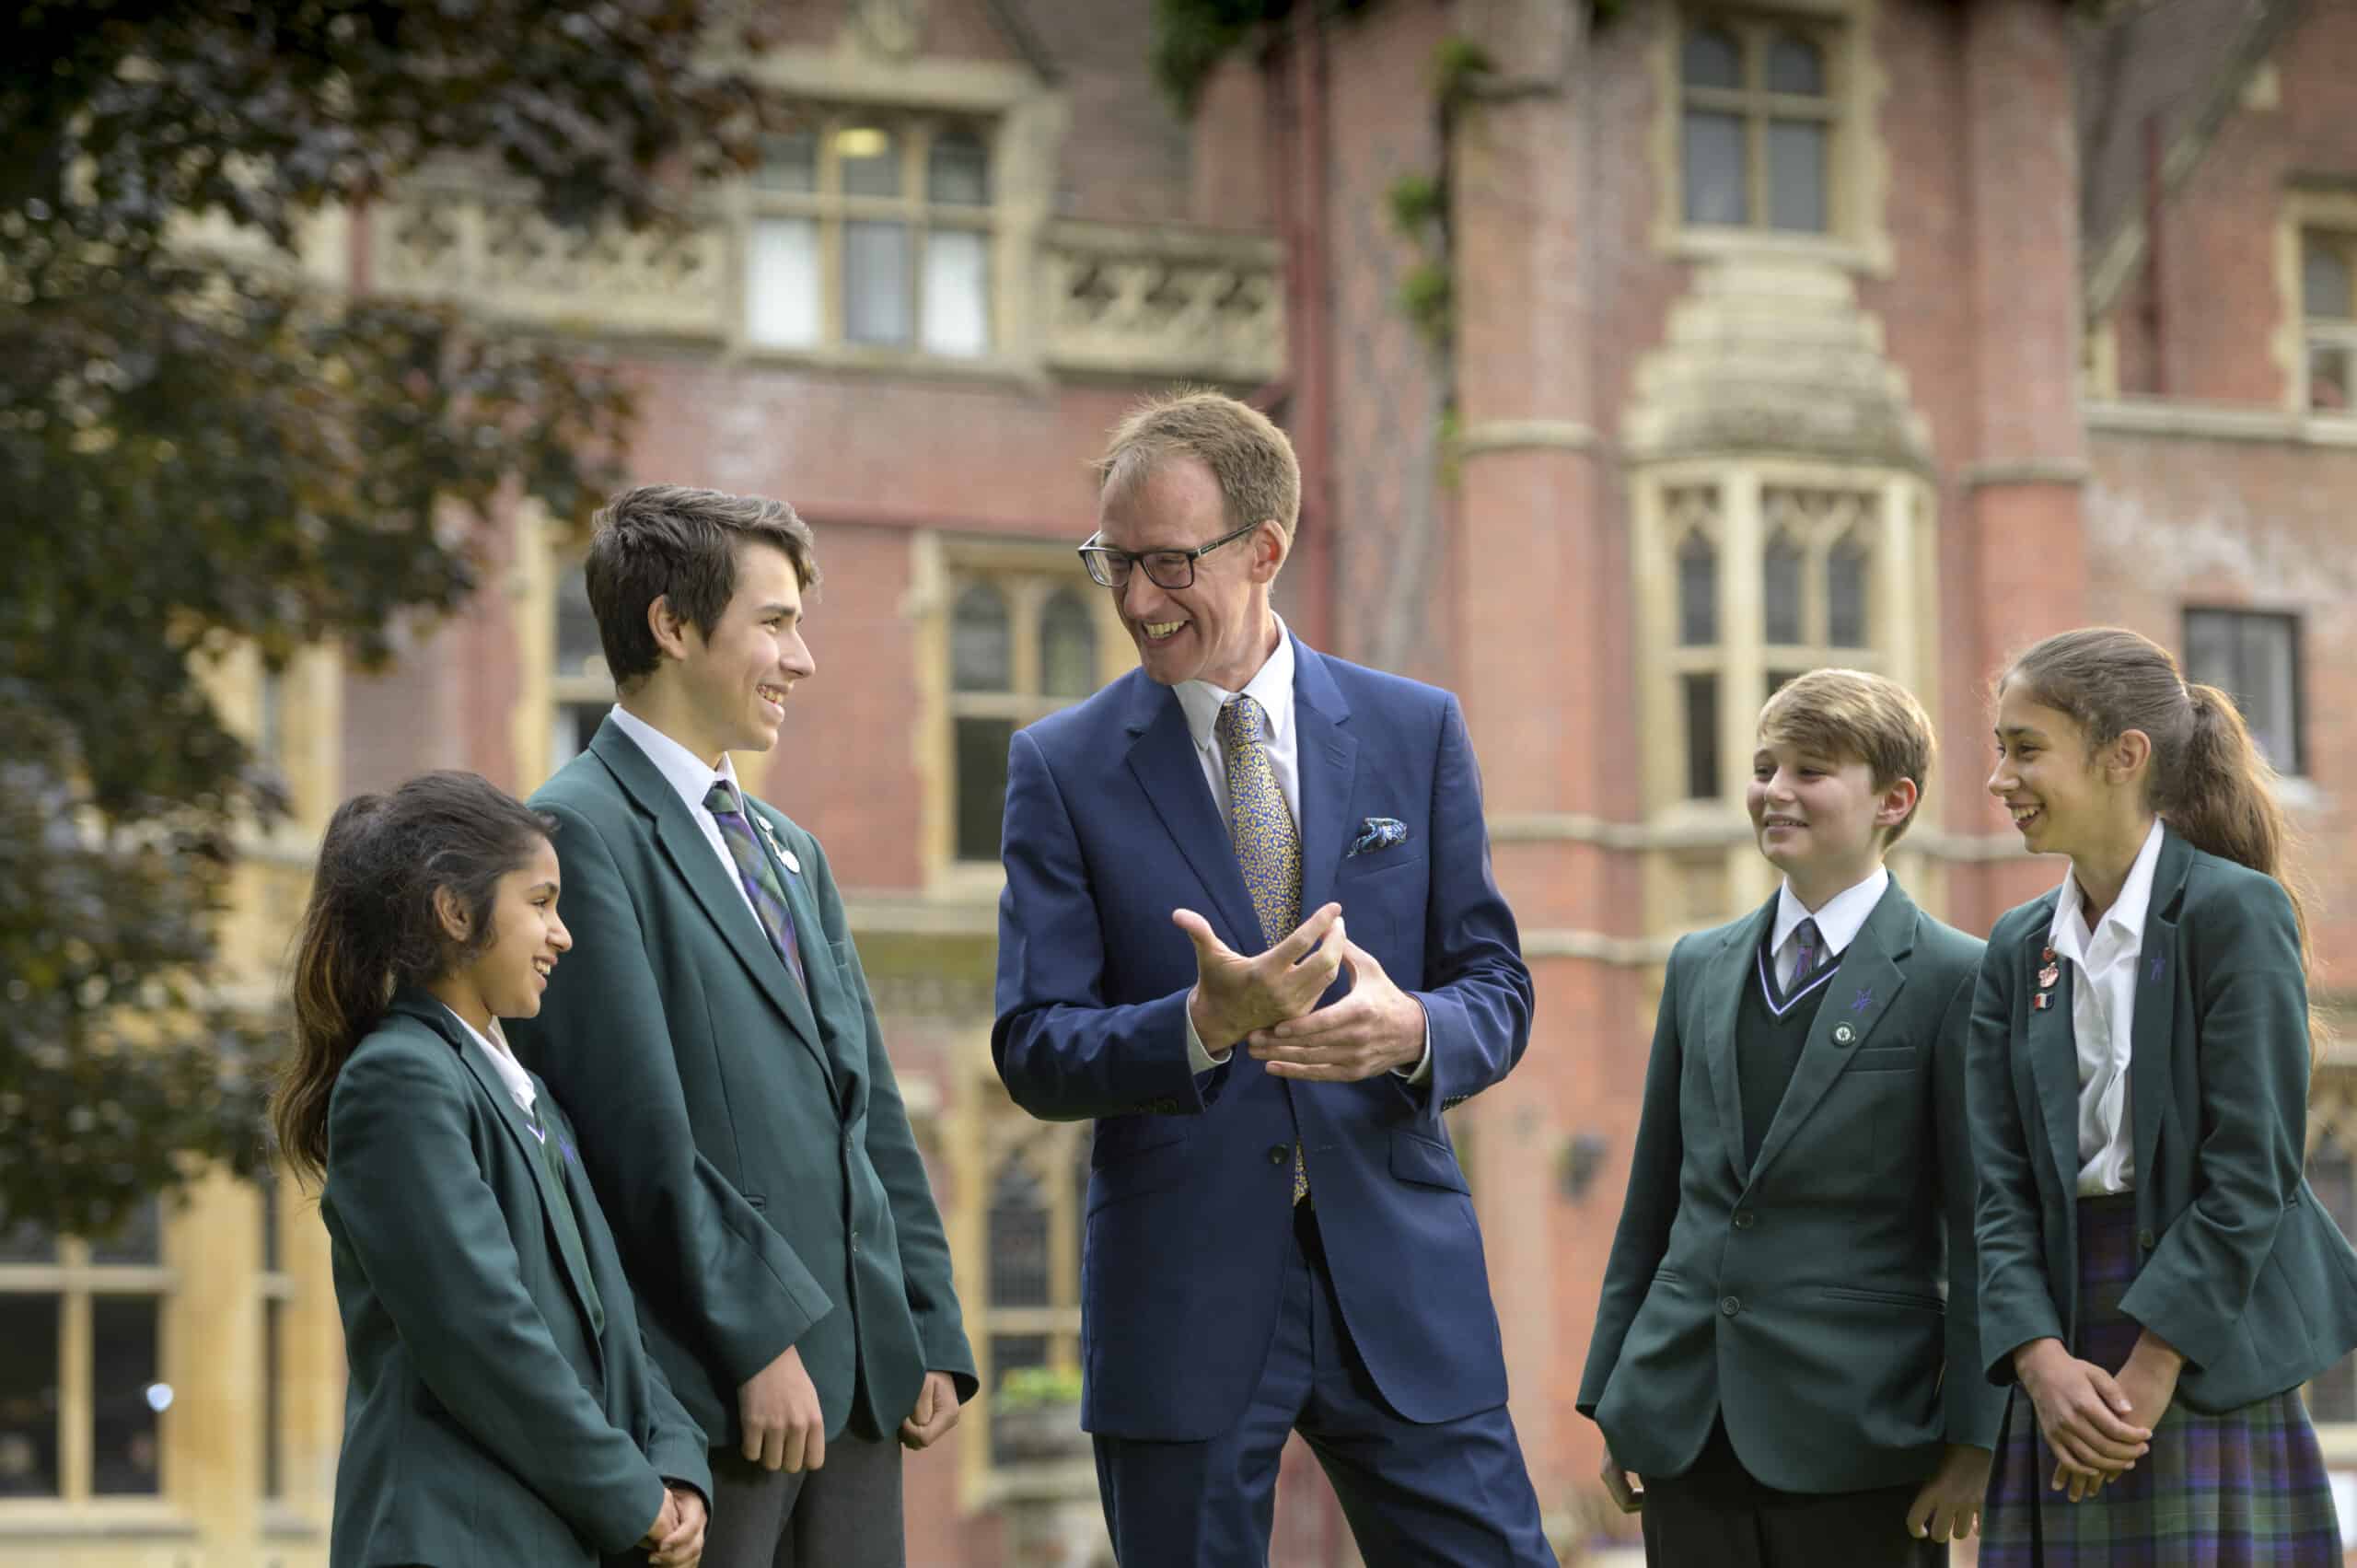 4 UK boarding schools preparing students for university and beyond